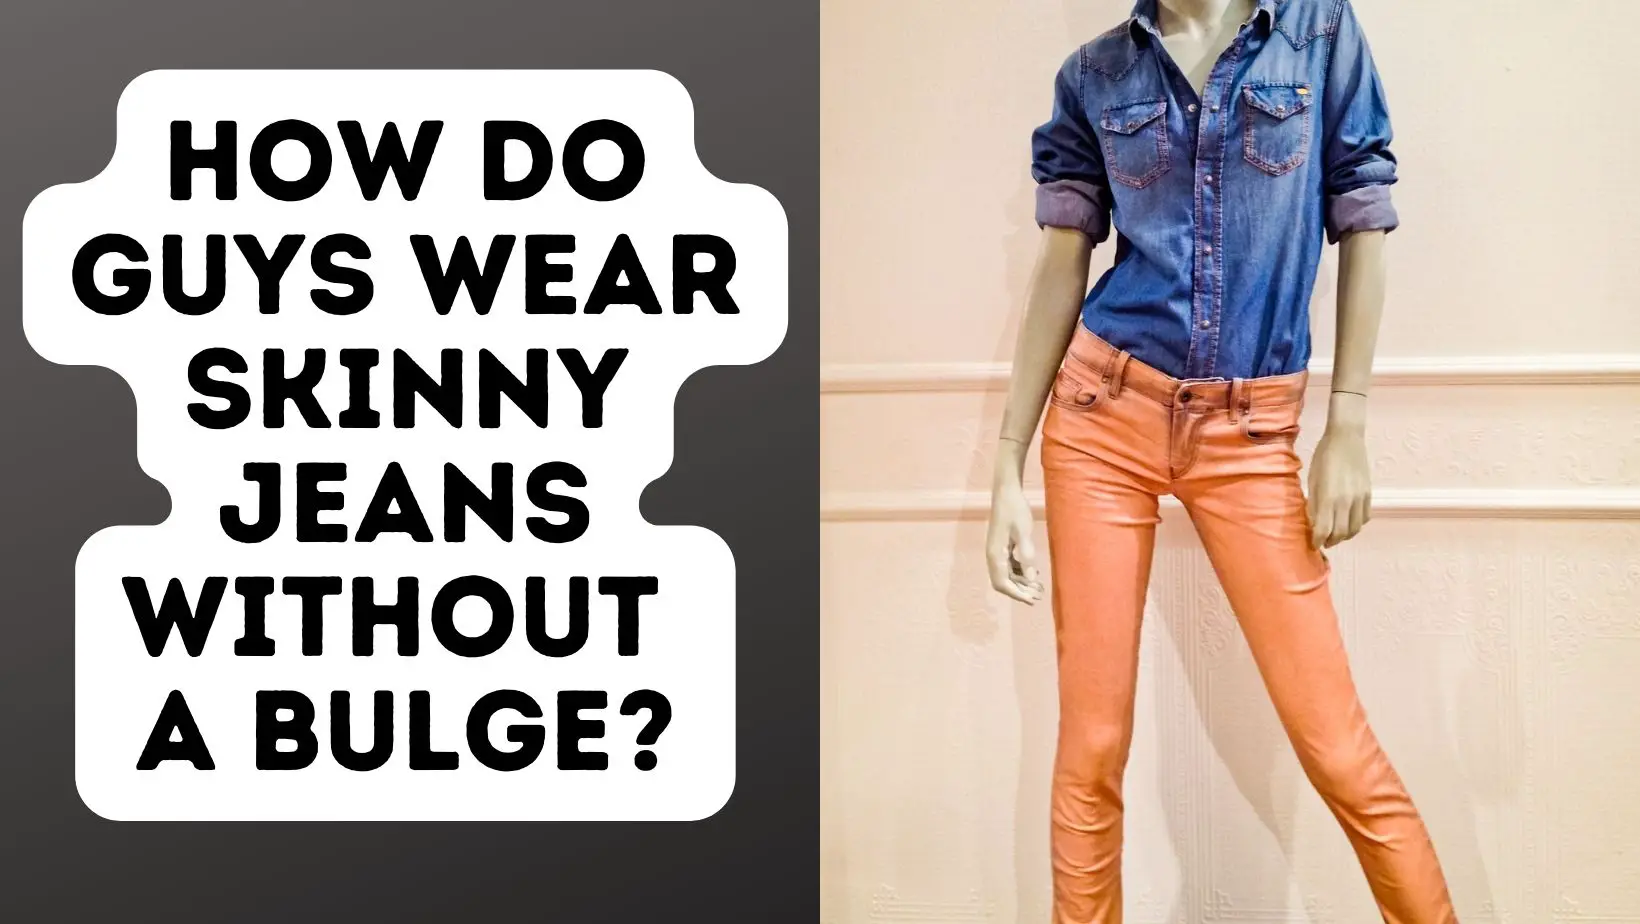 How Do Guys Wear Skinny Jeans Without A Bulge?